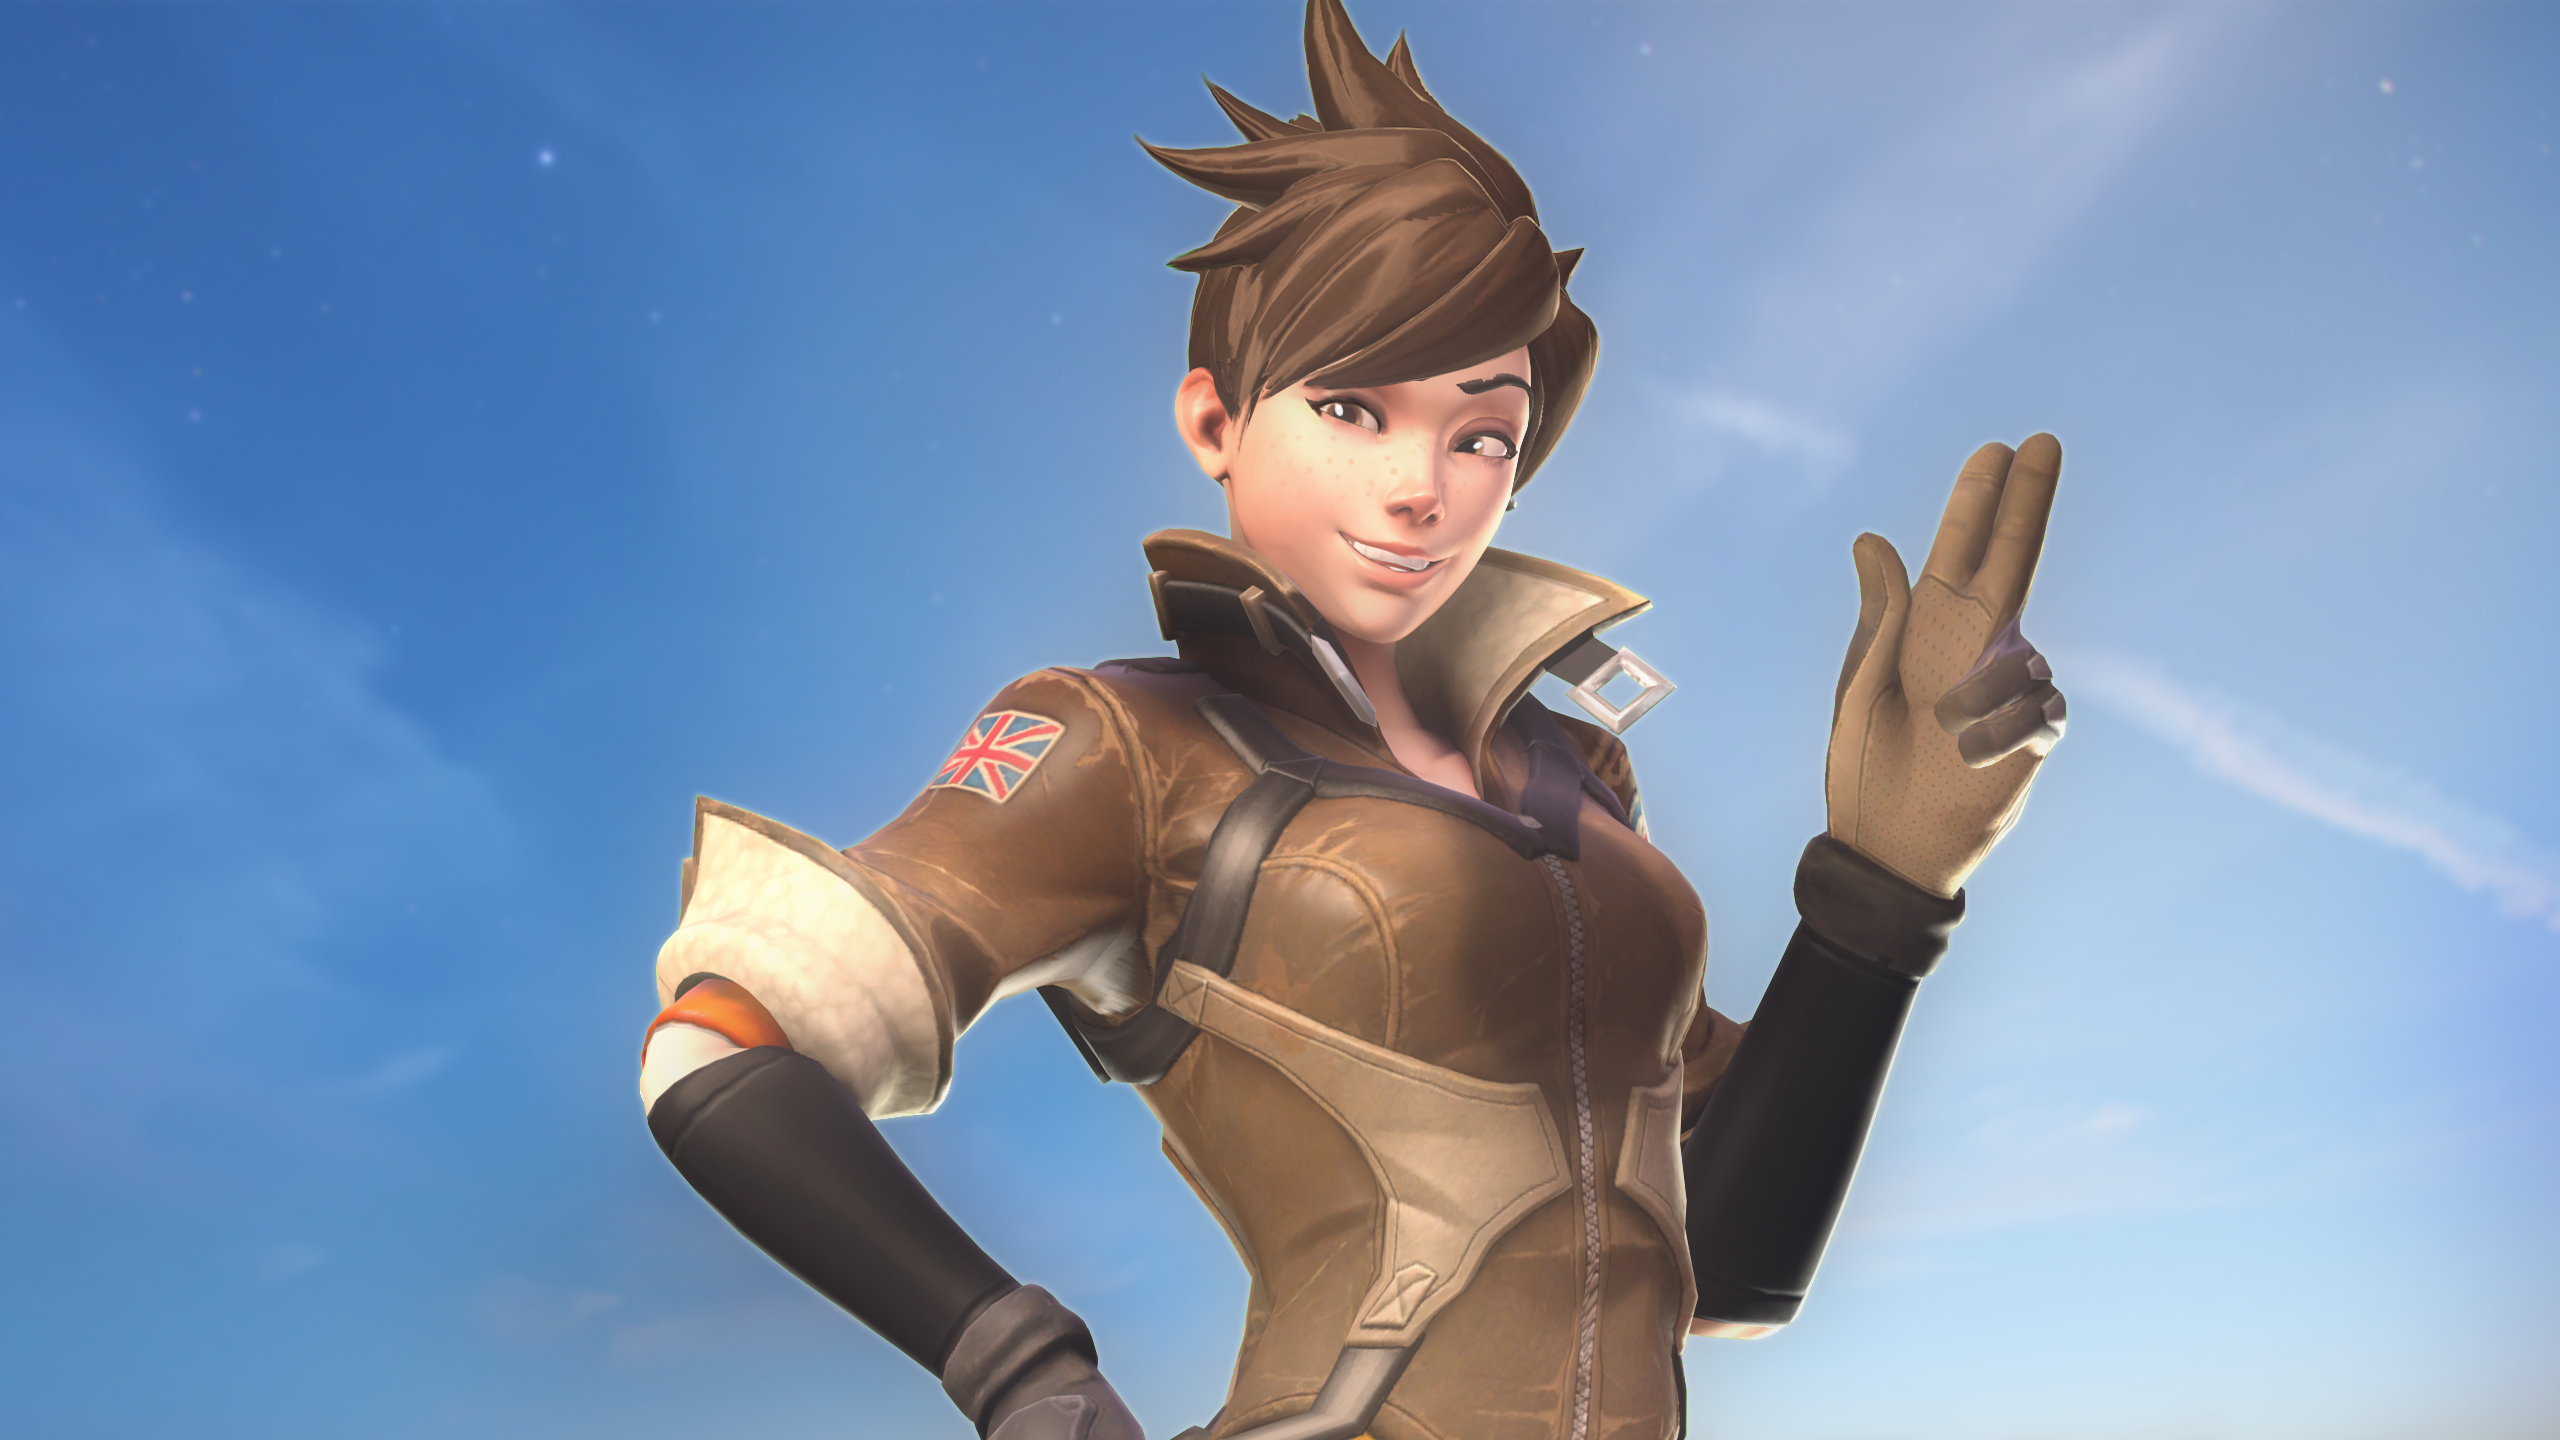 TRACER OVERWATCH 2 l PRIME GAMING ♡ ♥ 